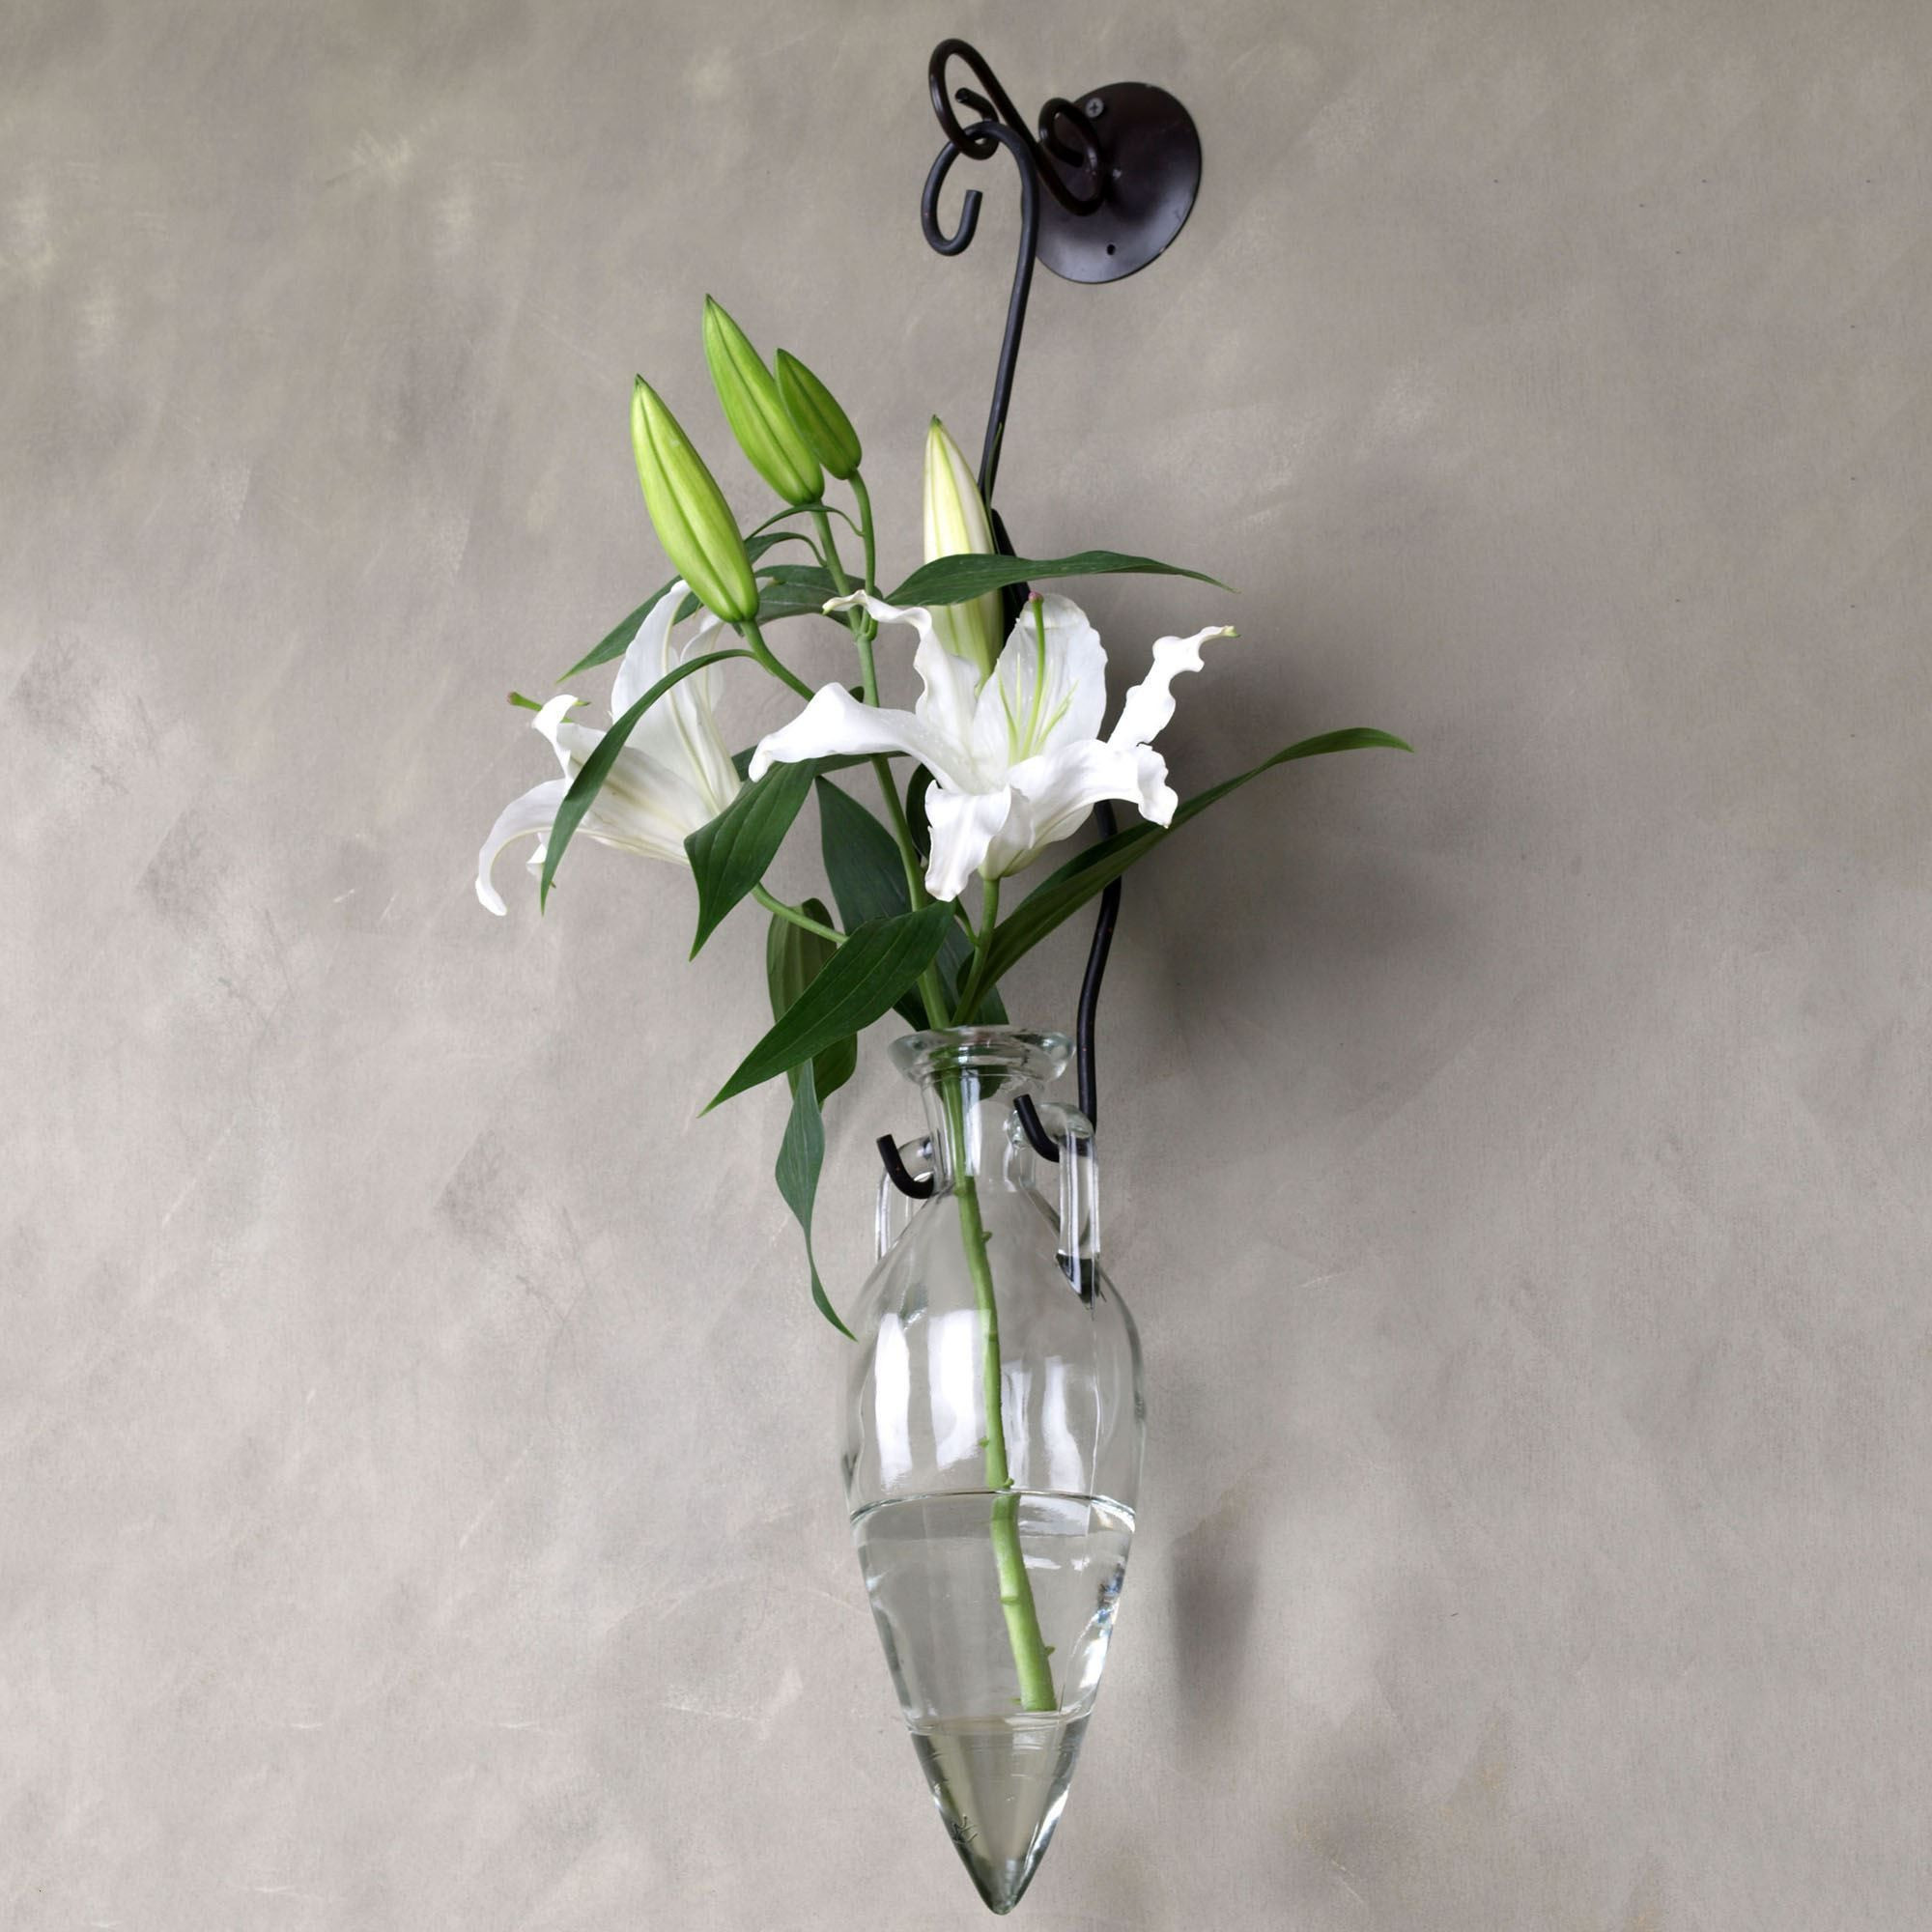 18 Cute West Germany Vase 2024 free download west germany vase of 18 mid century glass vase the weekly world within wall vase decor il fullxfull l7e9h vases wall flower vase